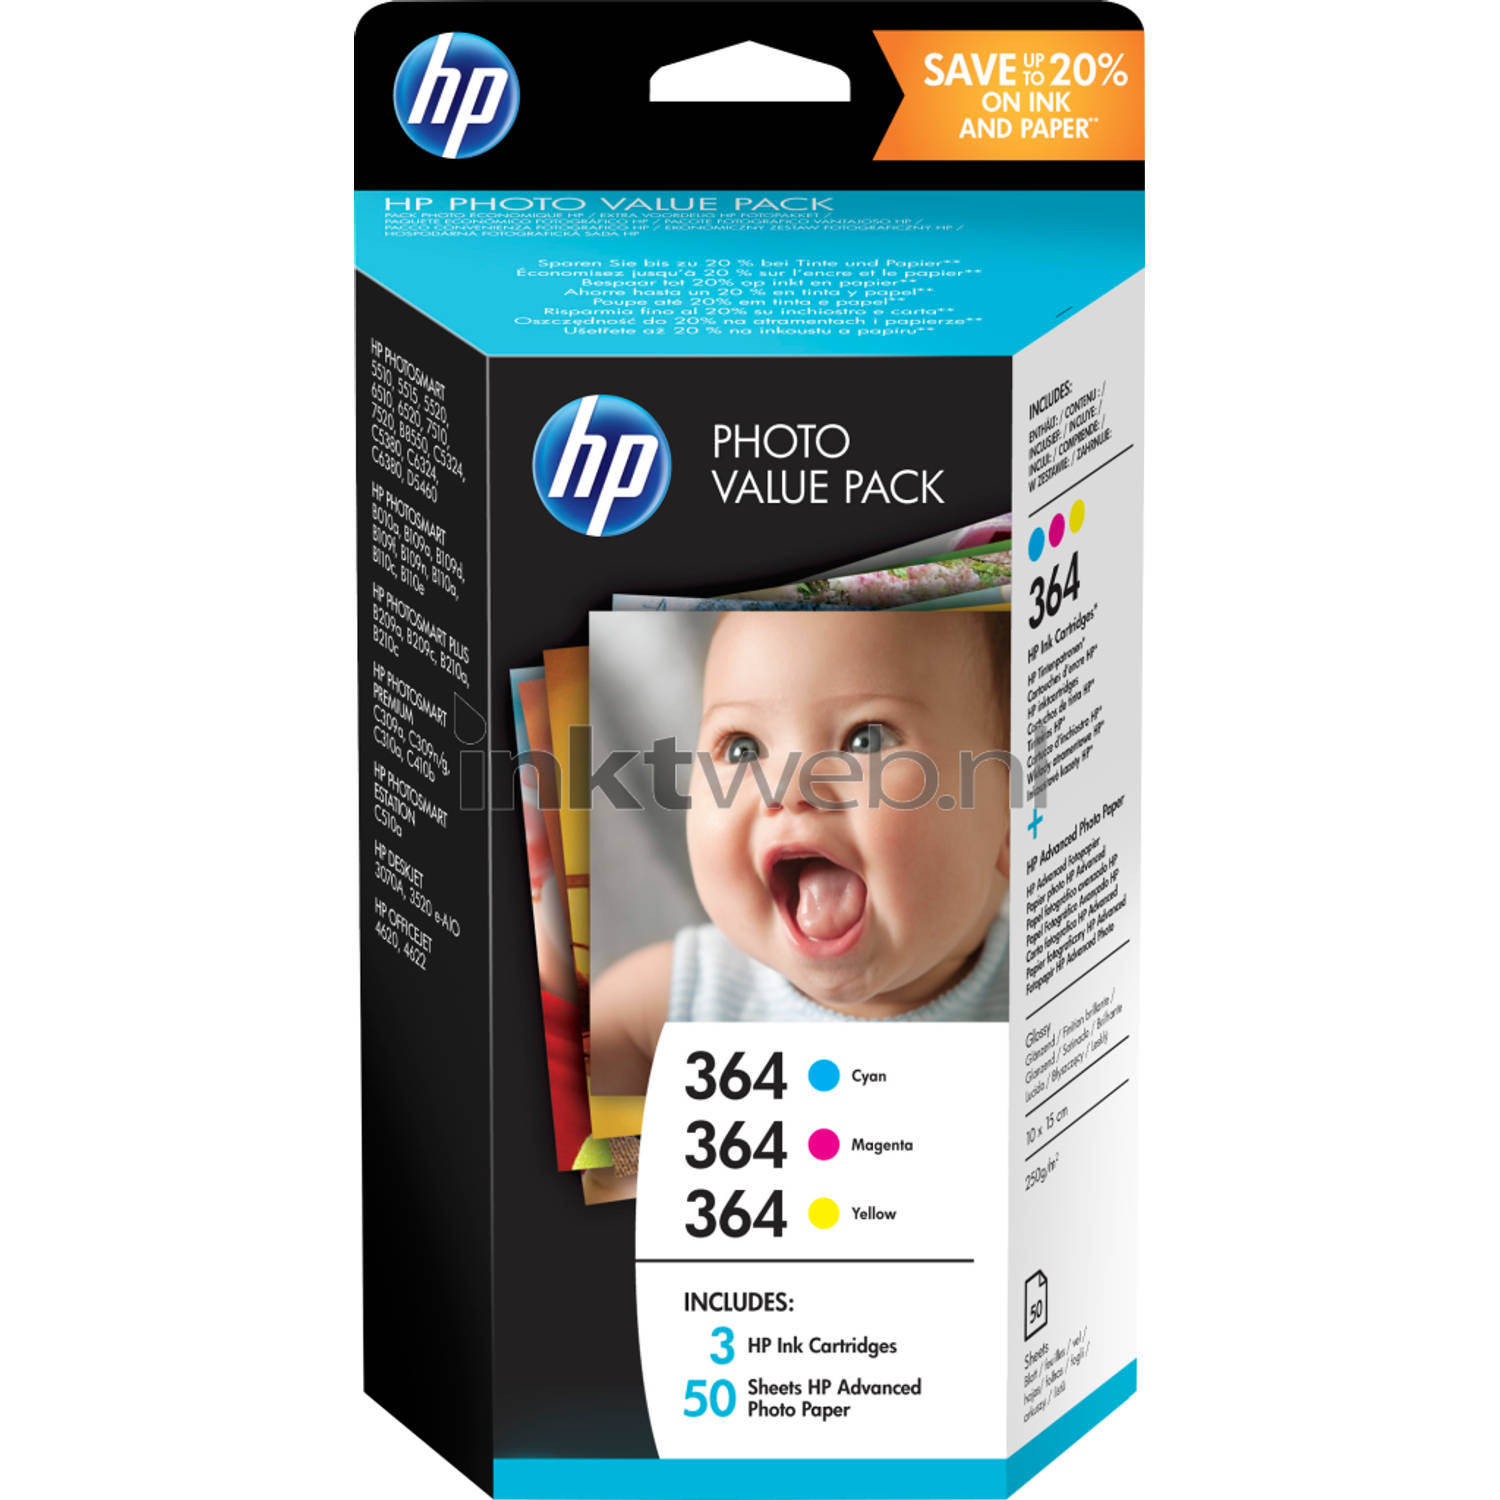 HP HP 364 PHOTO VALUE PACK (T9D88EE)